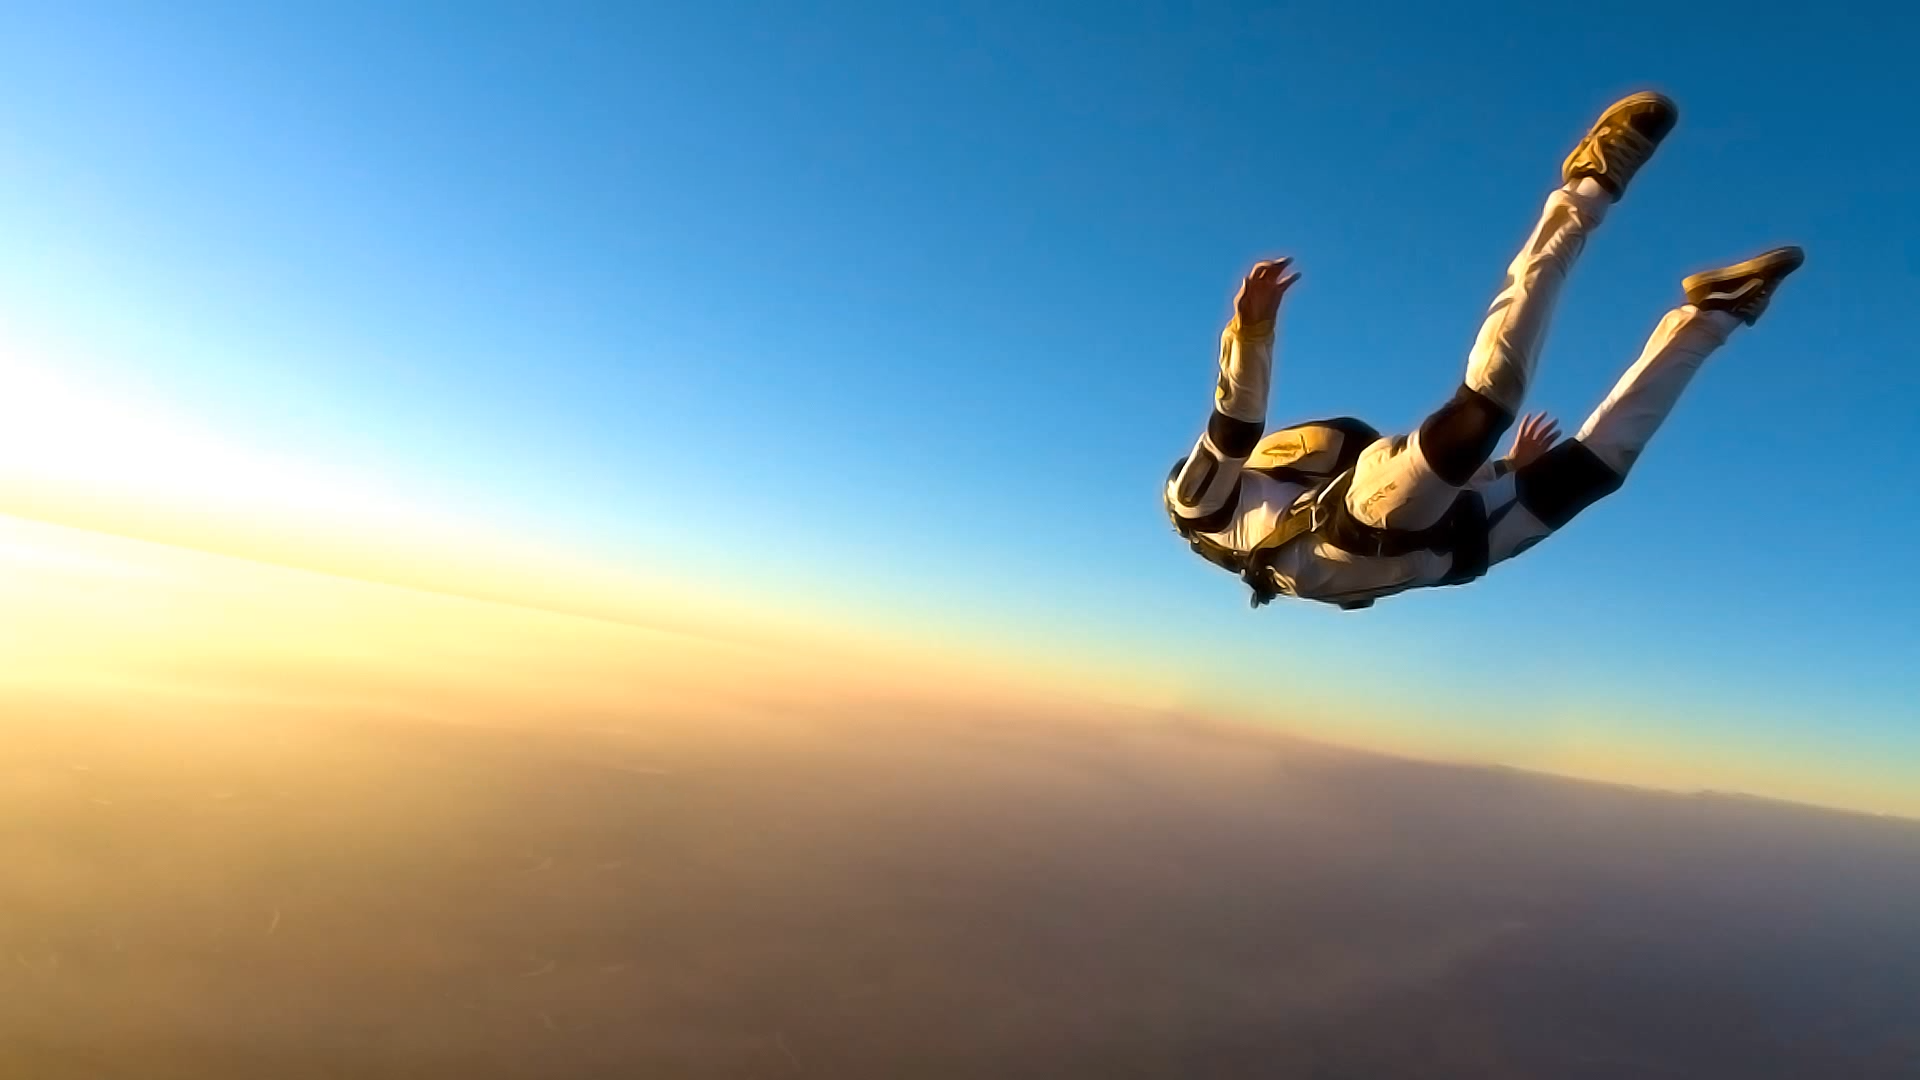 This US Daredevil Is Going To Experiment Skydive Without Parachute And Wingsuit